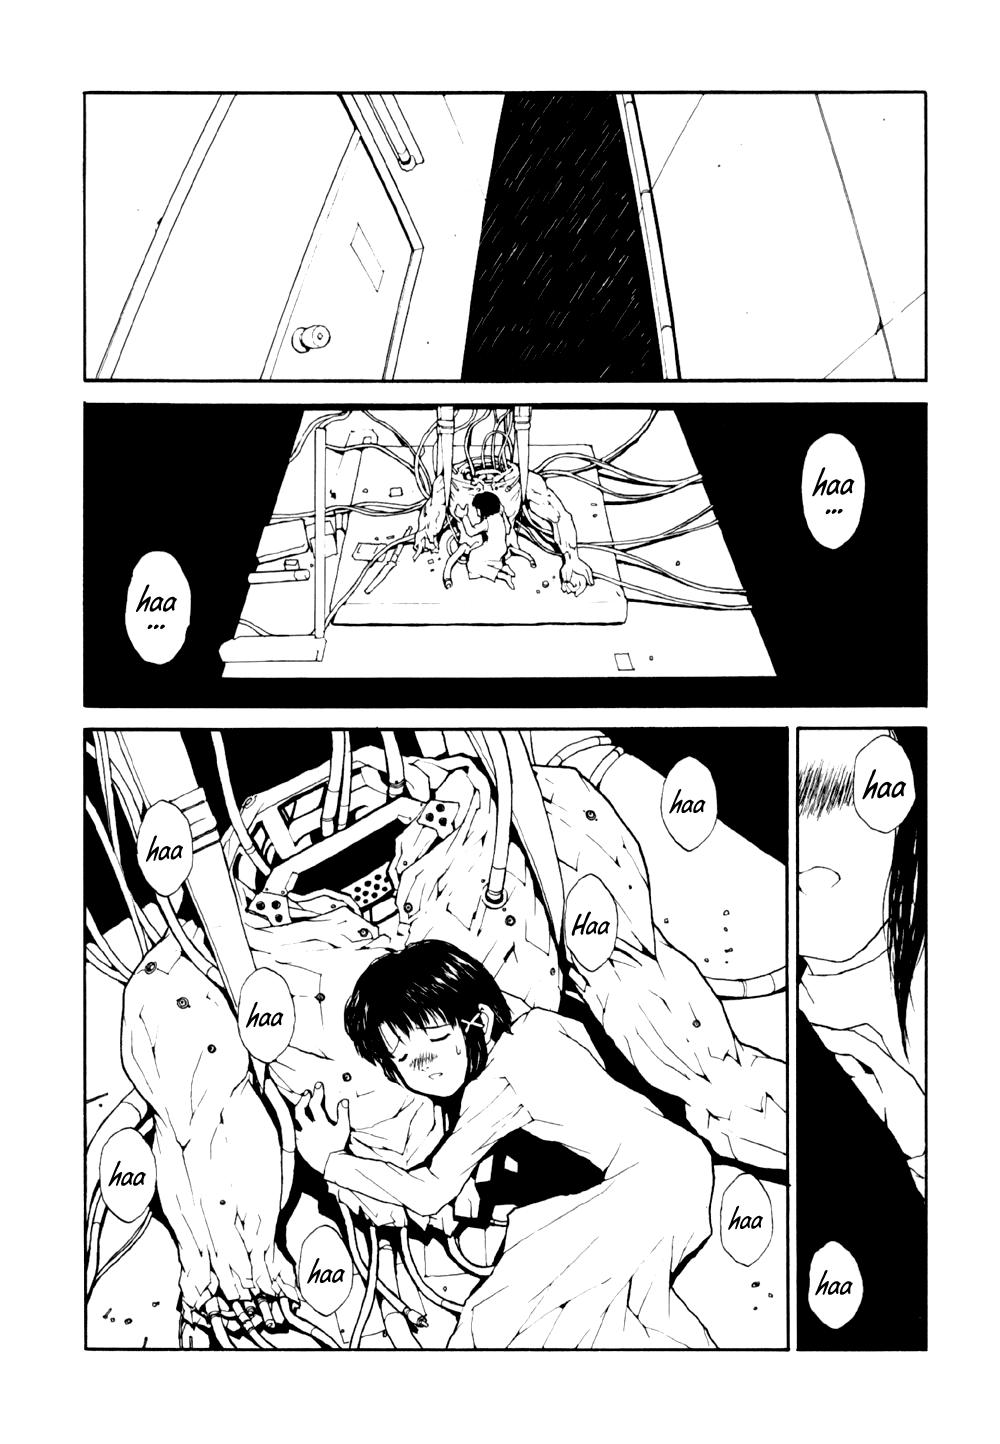 Super Hot Porn The Lain Song - Serial experiments lain Fleshlight - Page 8